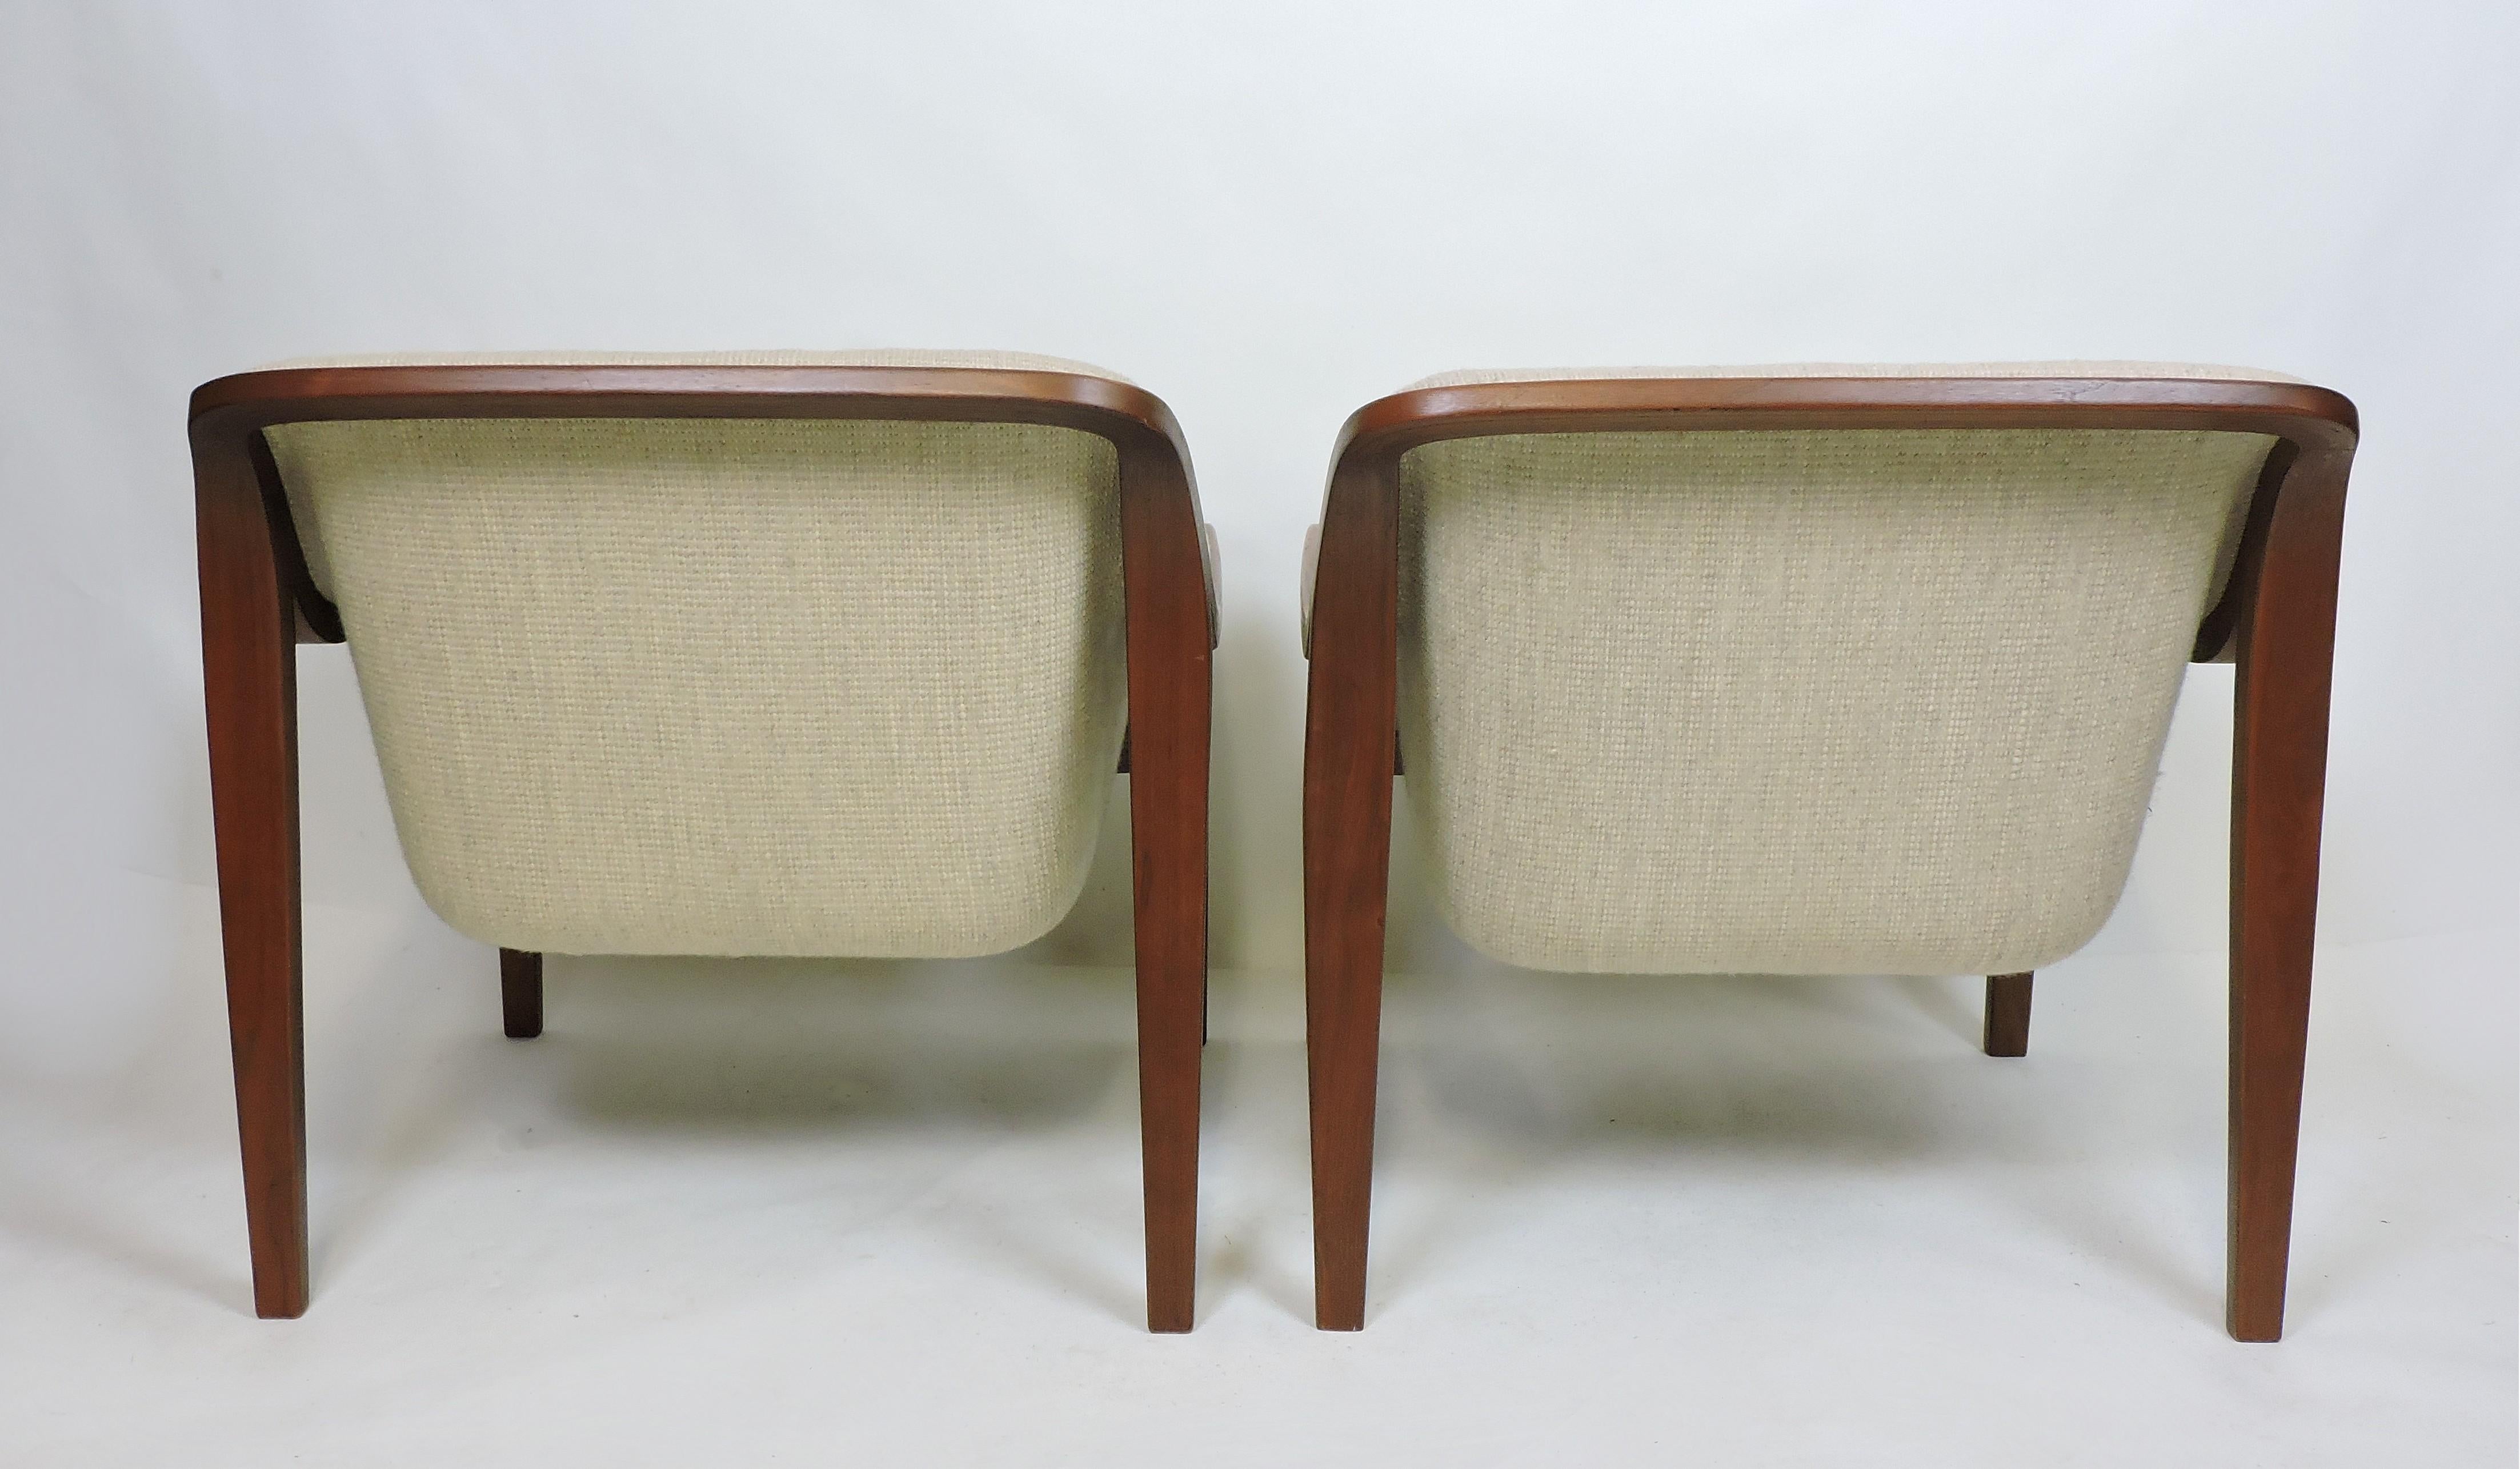 American Pair of Bill Stephens Mid-Century Modern Bentwood Lounge Chairs for Knoll